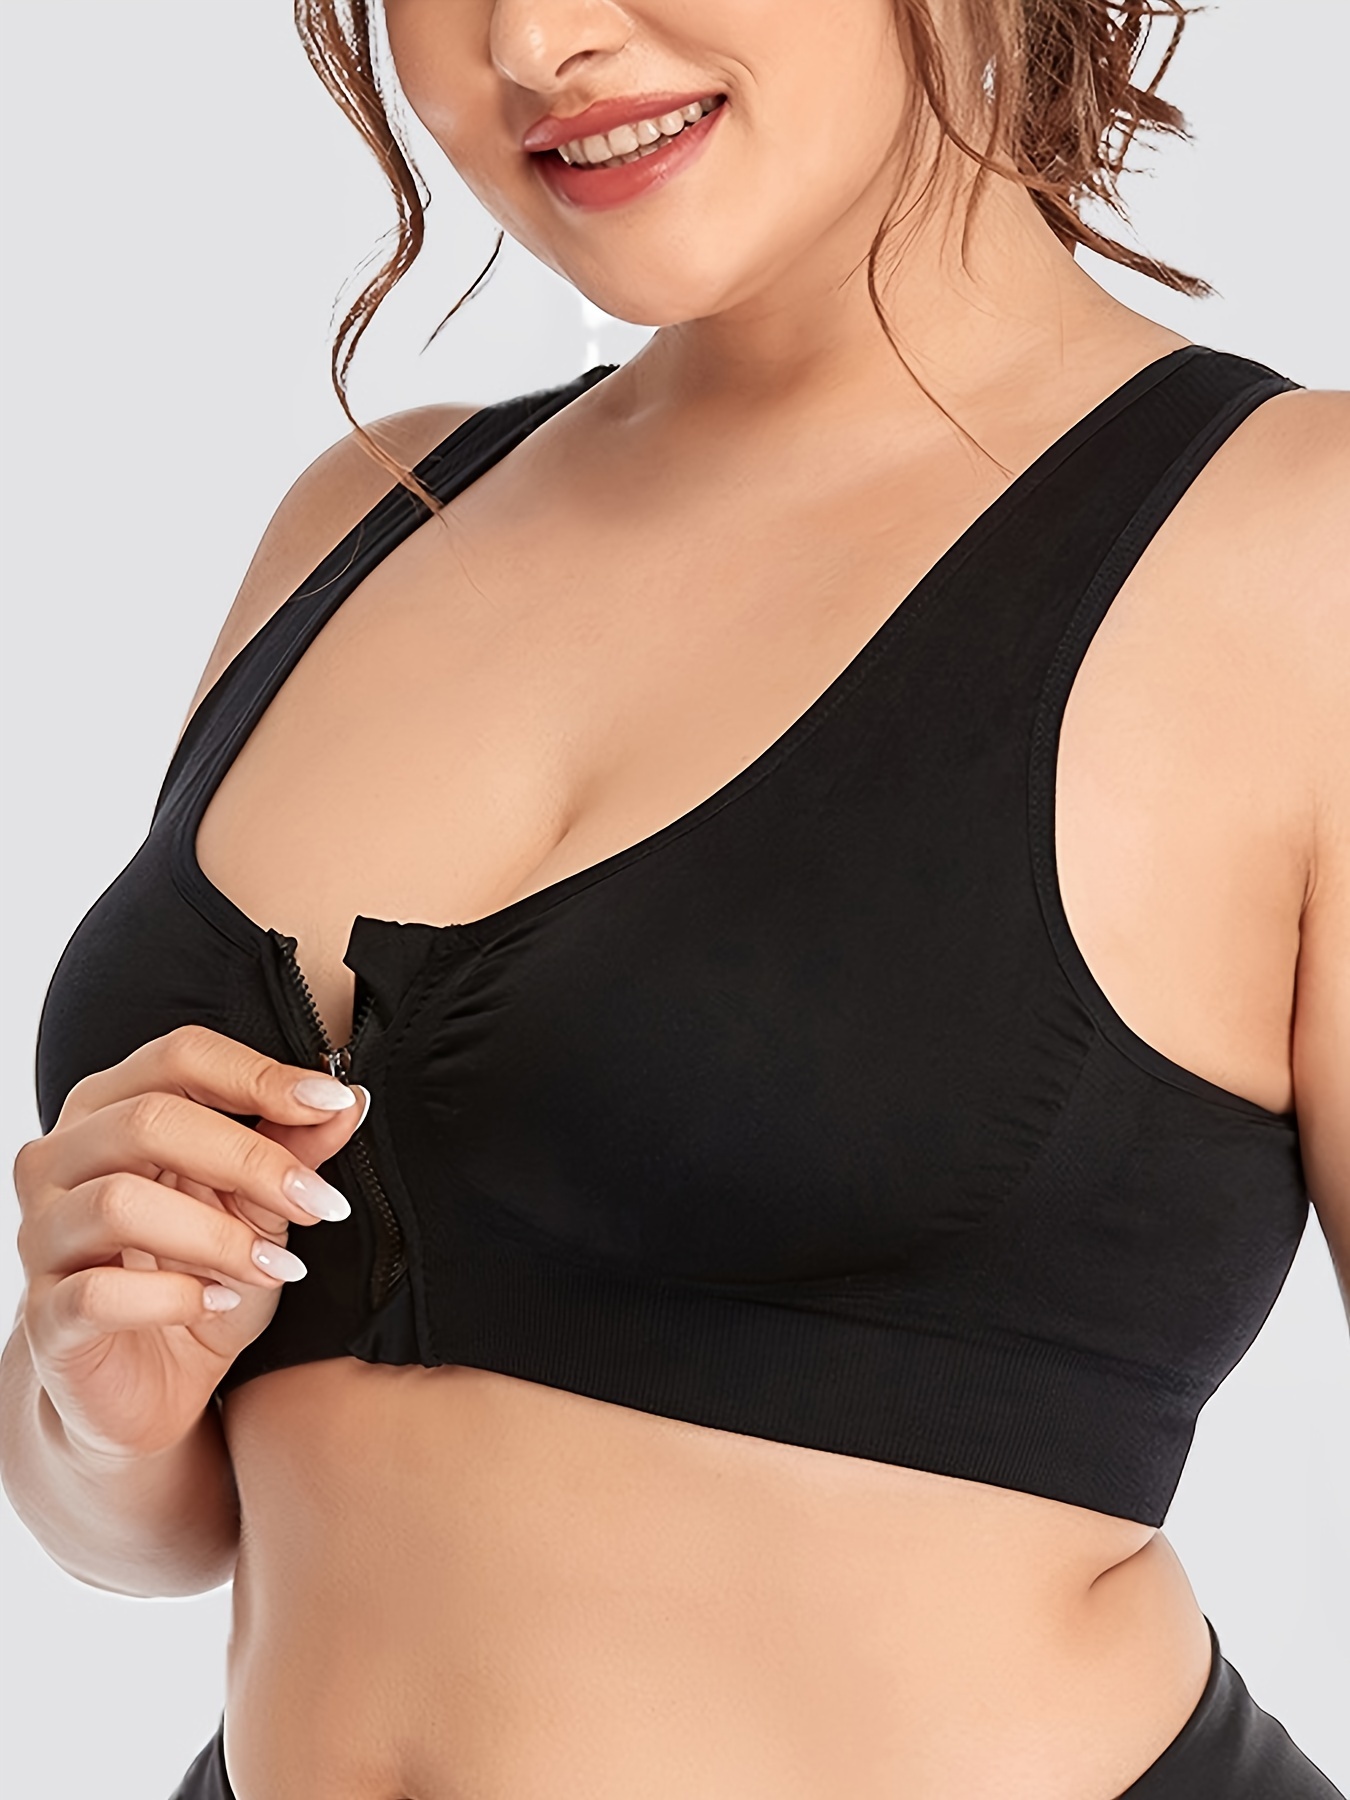 Sports Bras for Women Plus Size, High Impact Shockproof Sports